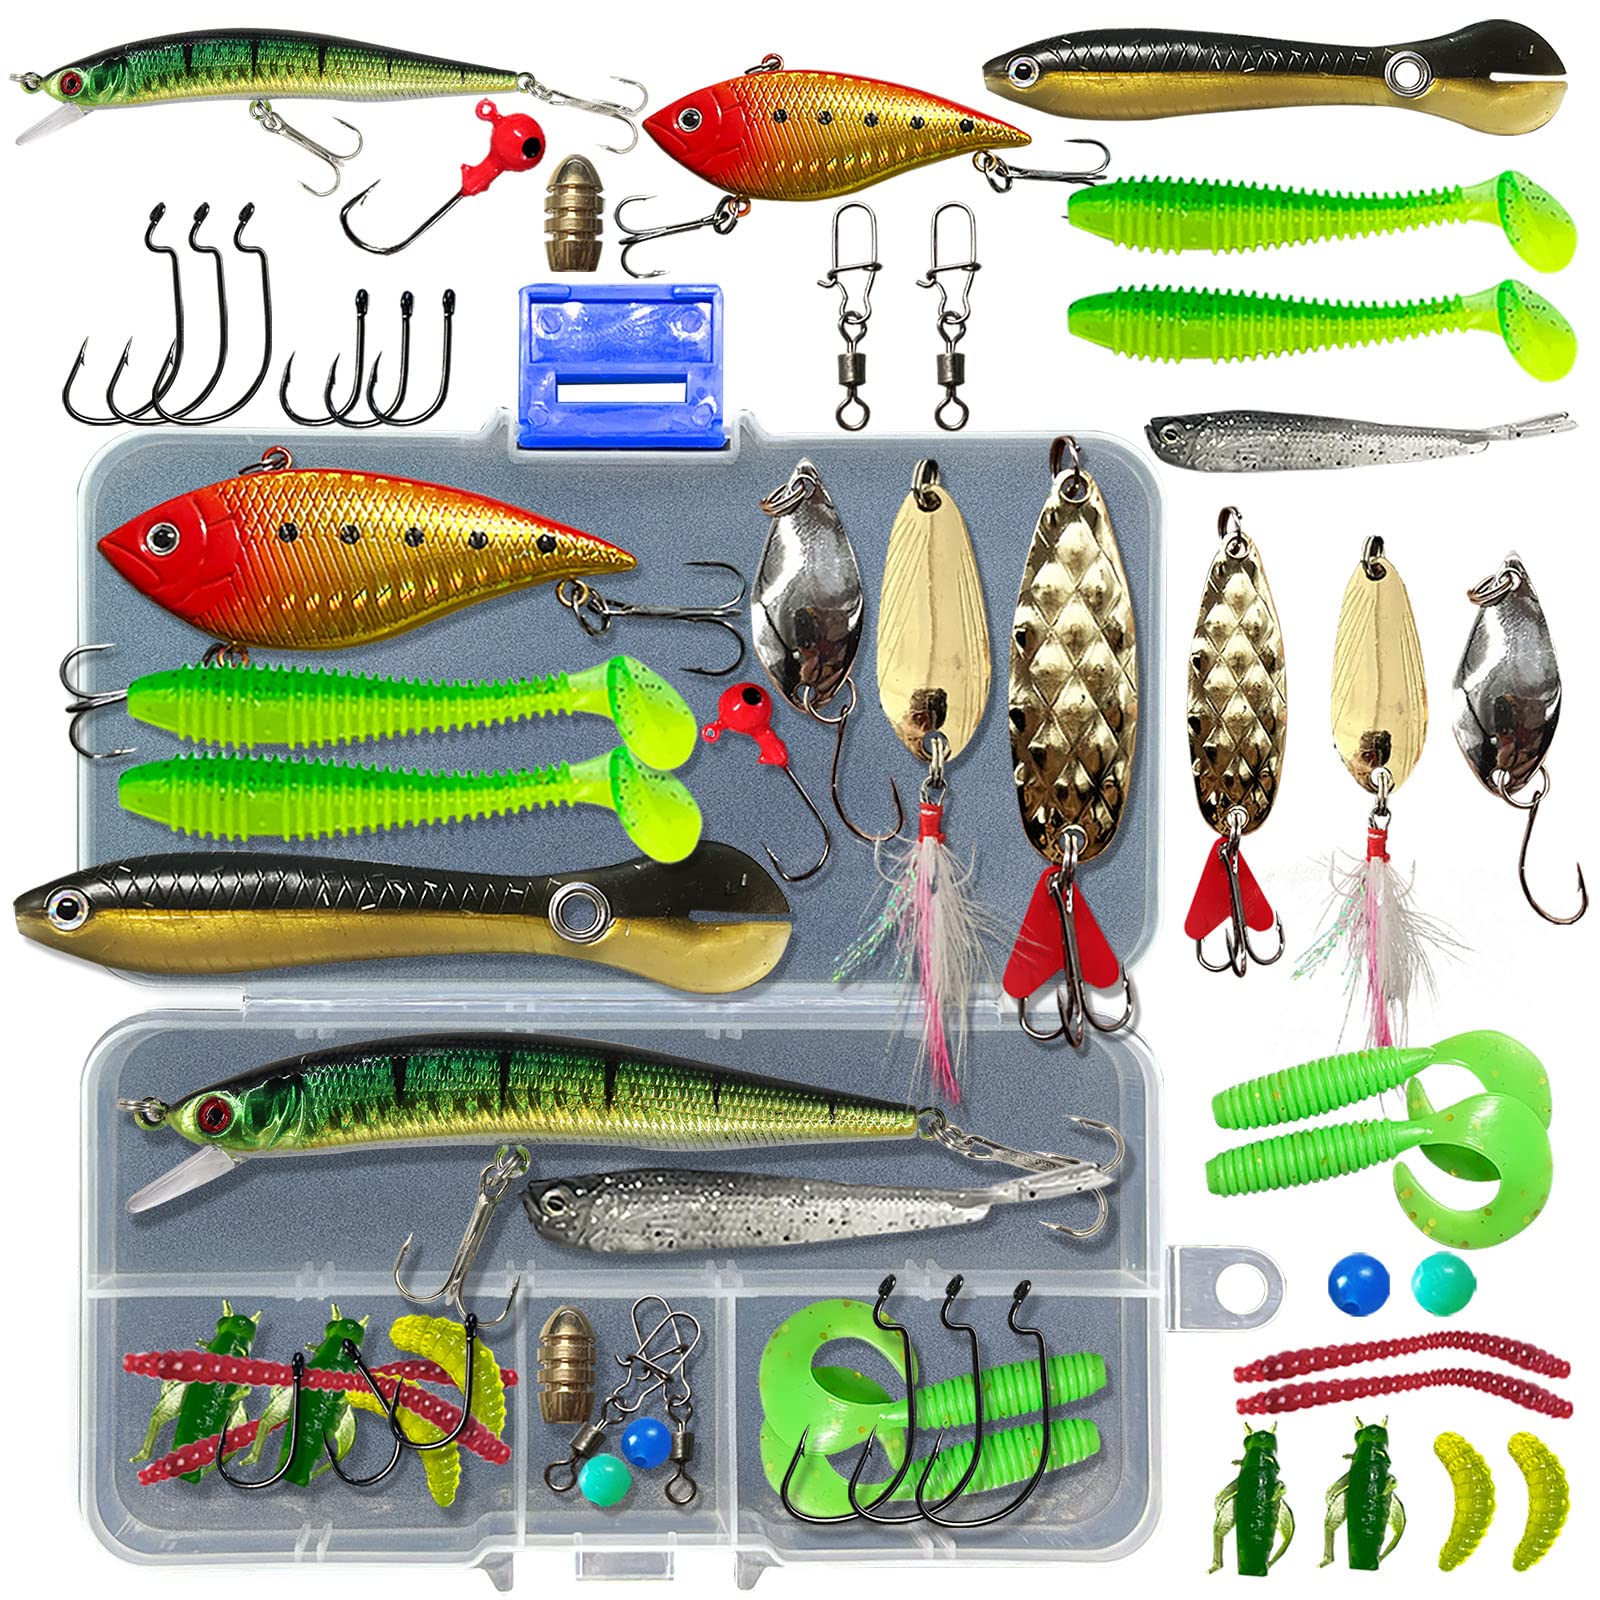 Ycolew Fishing Lures Tackle Box Bass Fishing Kit,Saltwater and